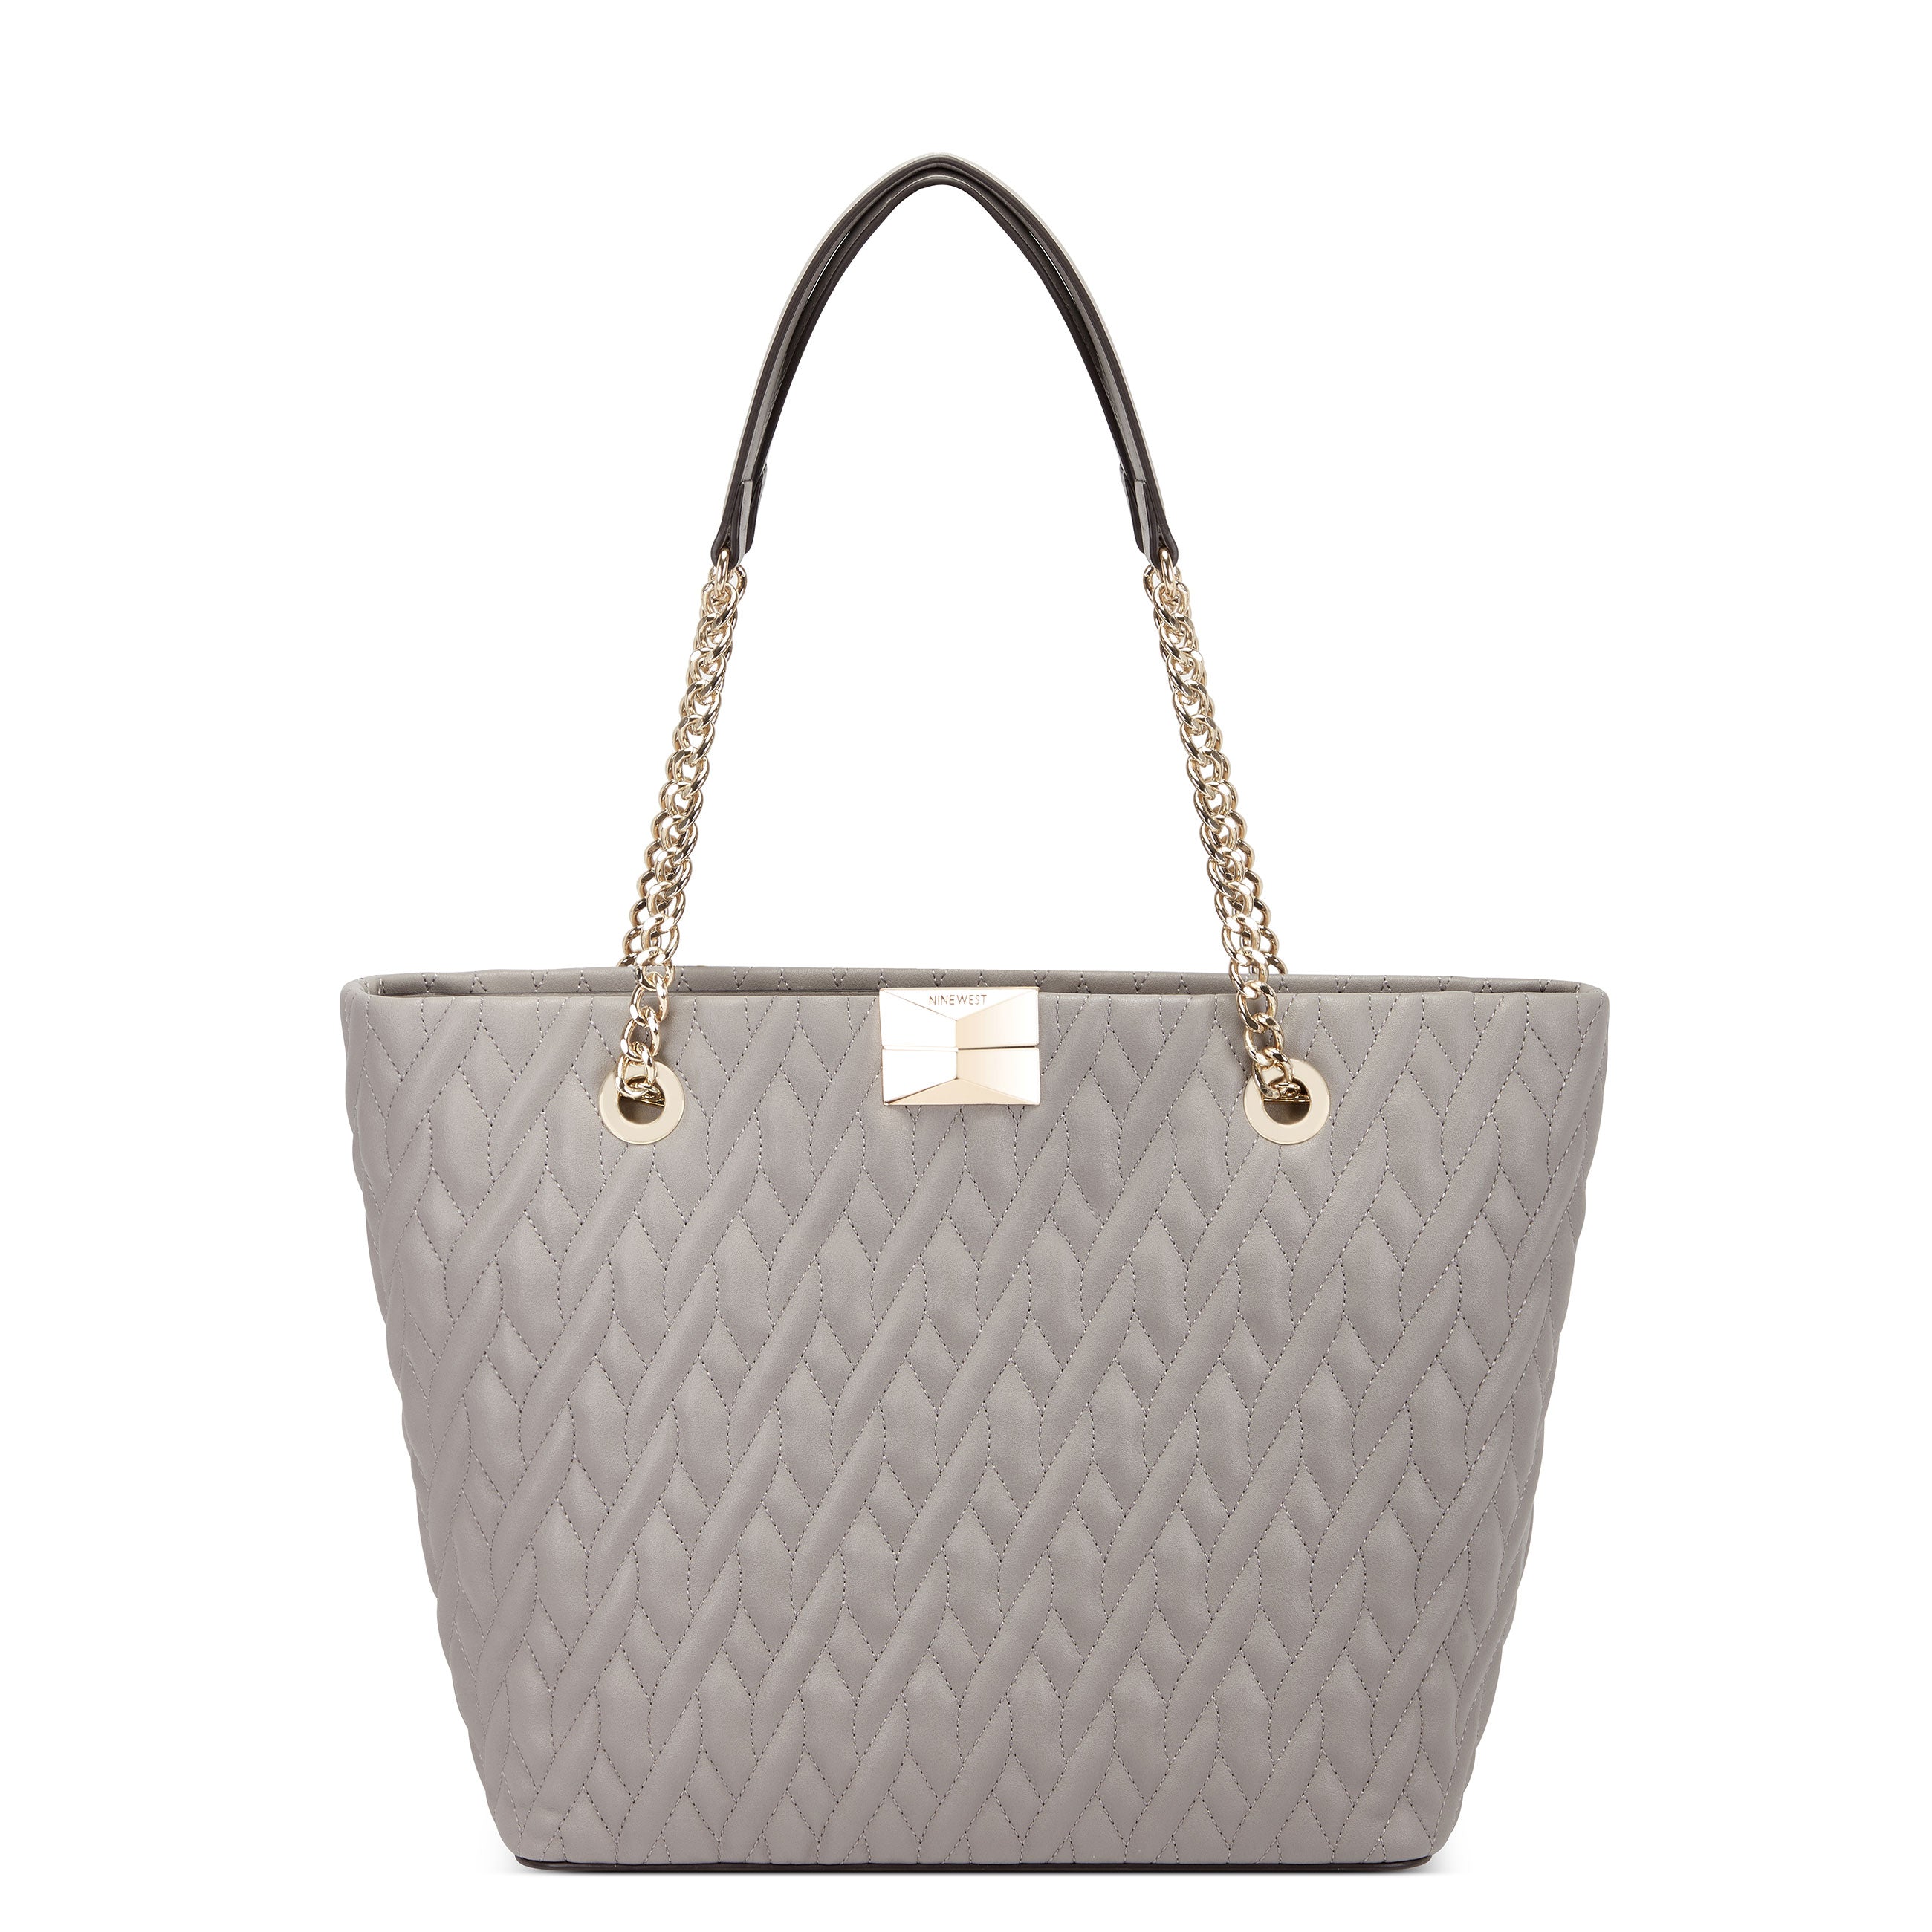 Totes And Shoulder Bags – The Shoe Shop